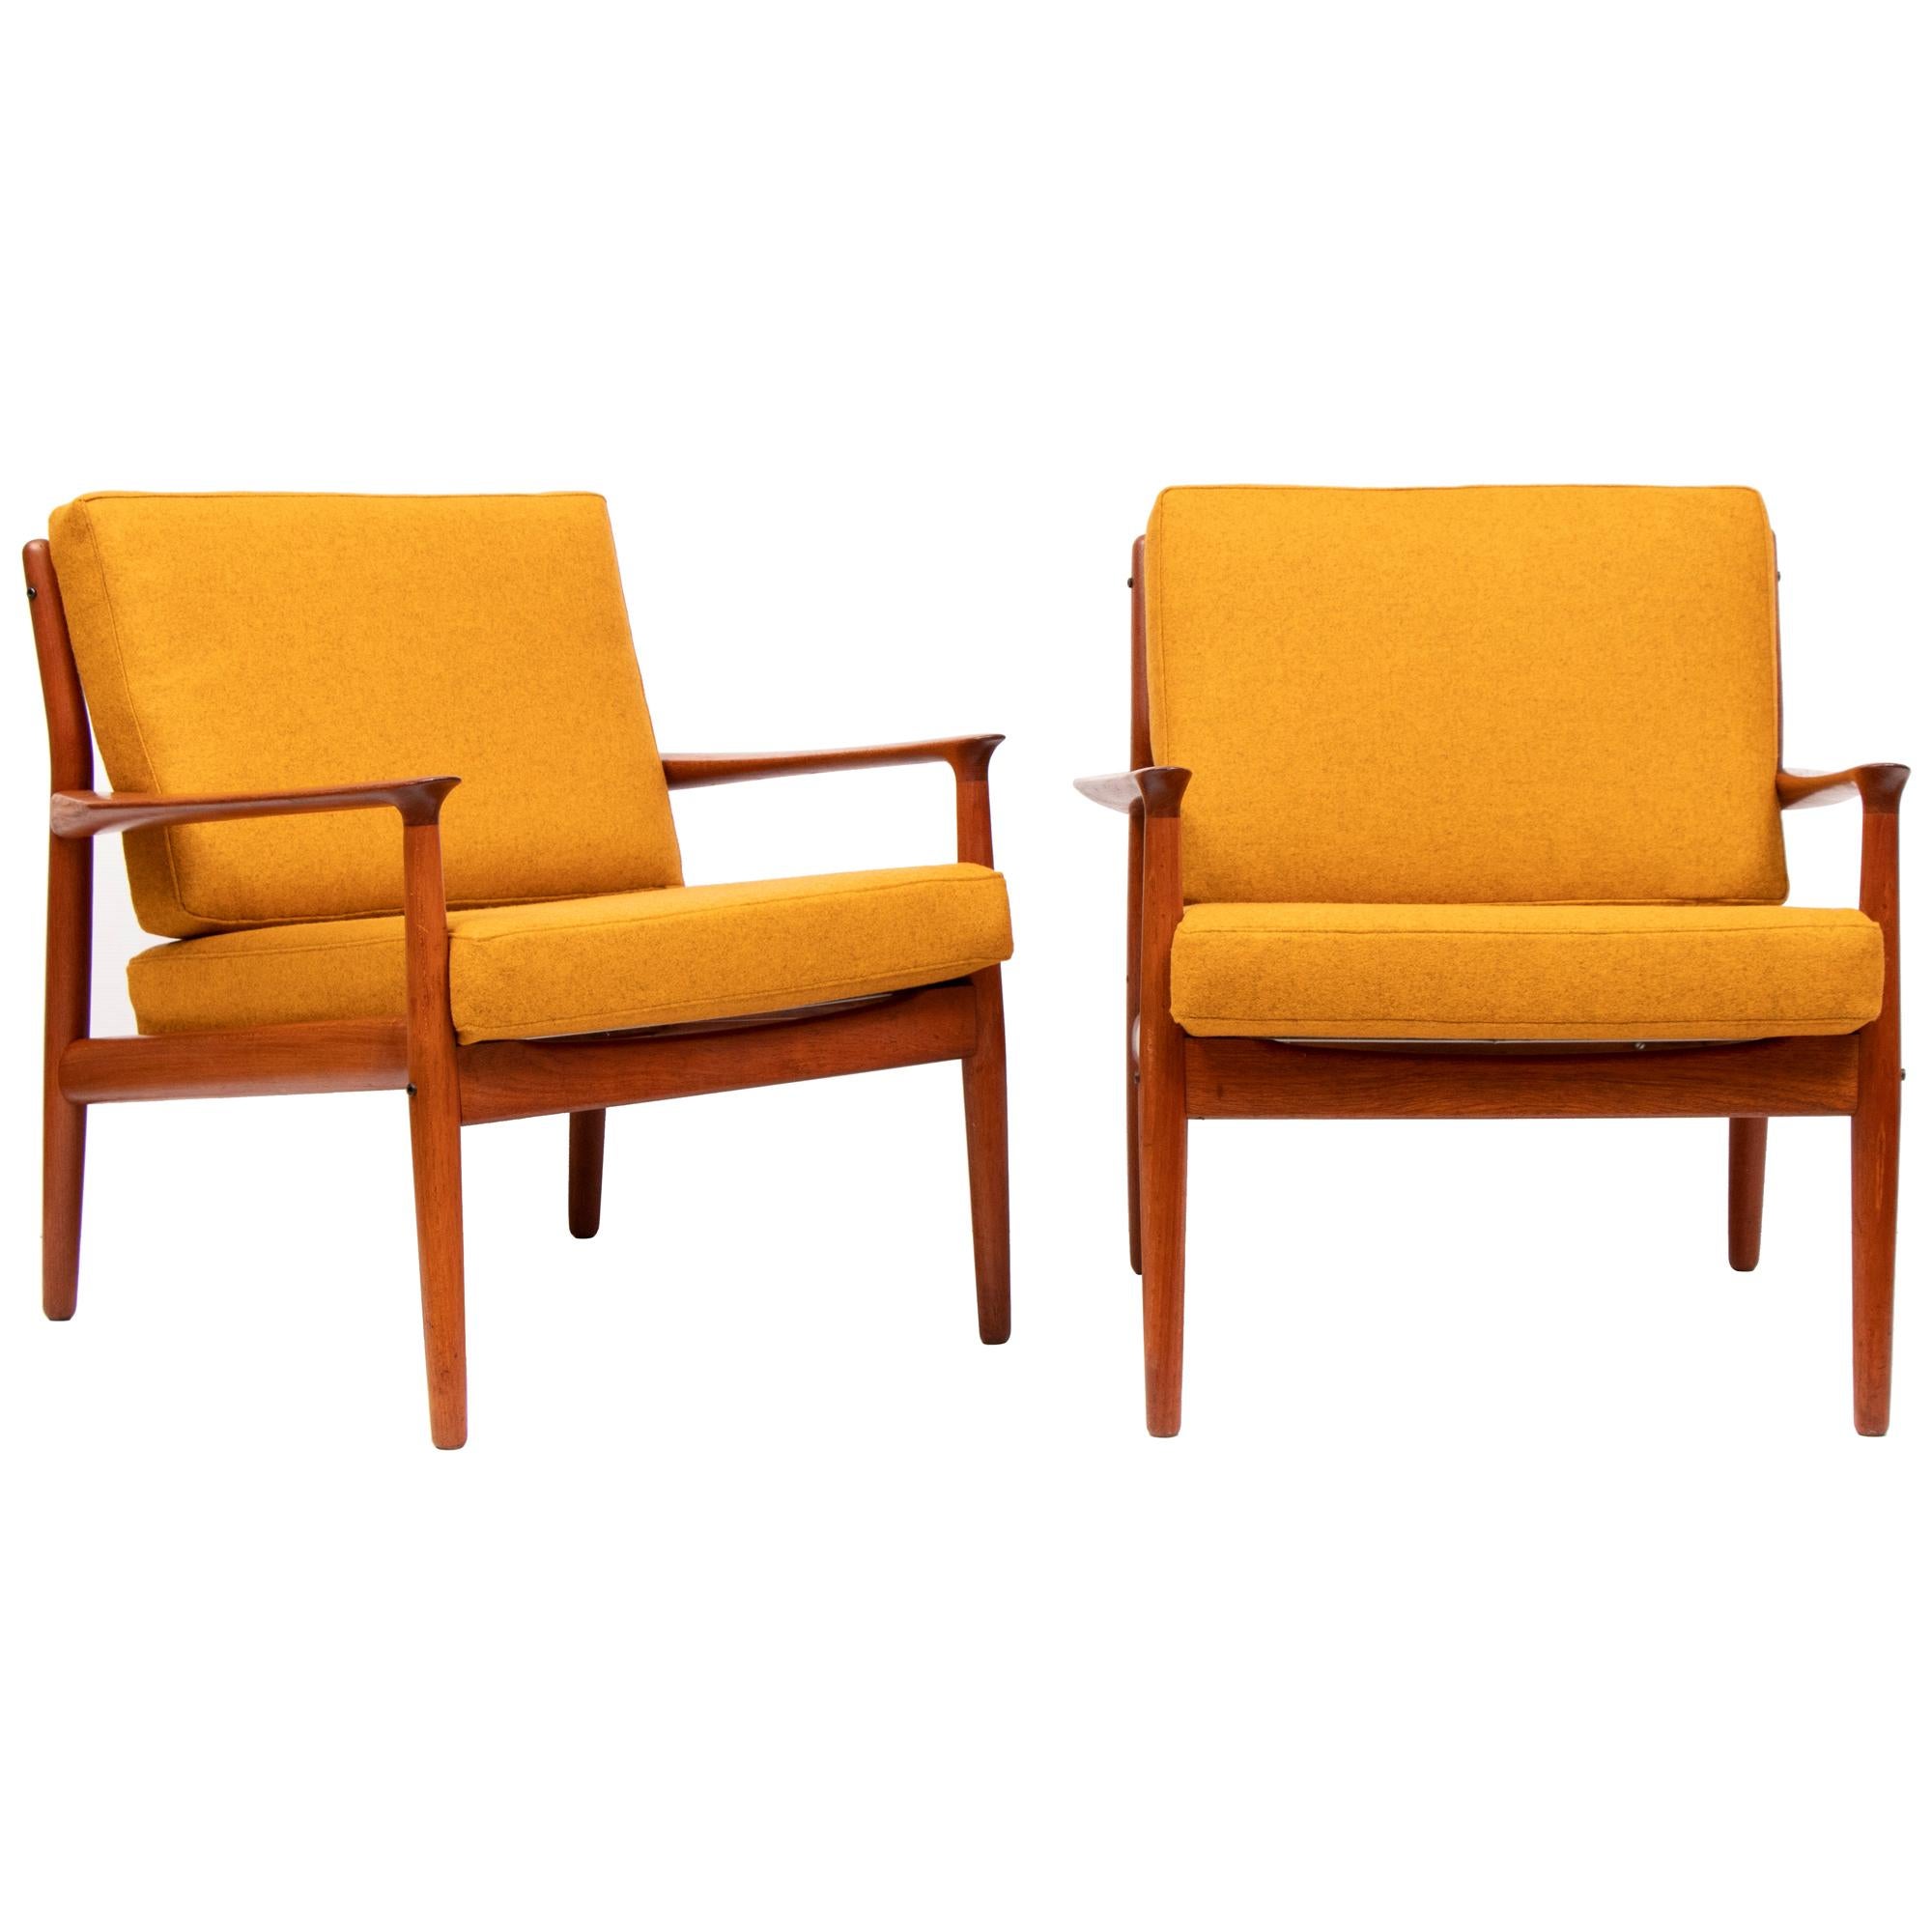 Pair of 1950s Grete Jalk for Glostrup Model 218 Teak Reupholstered Armchairs